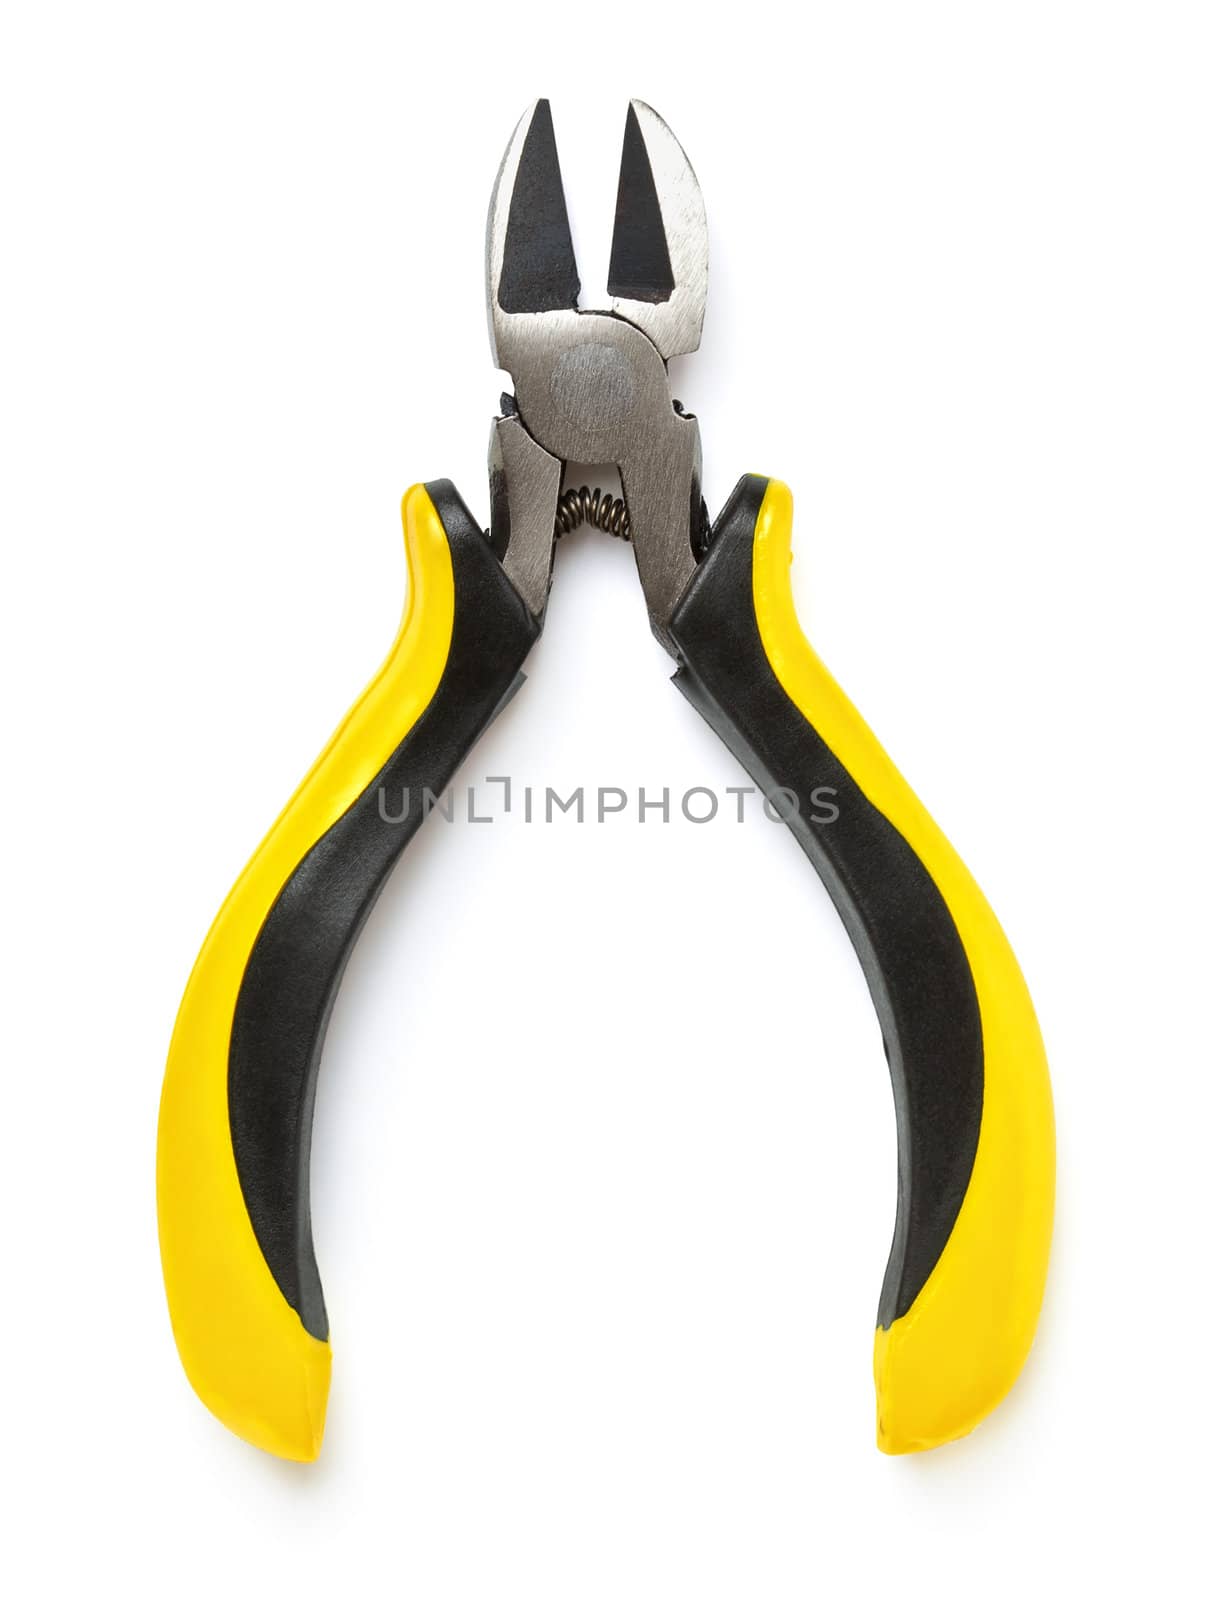 metal wire cutting pliers isolated on white